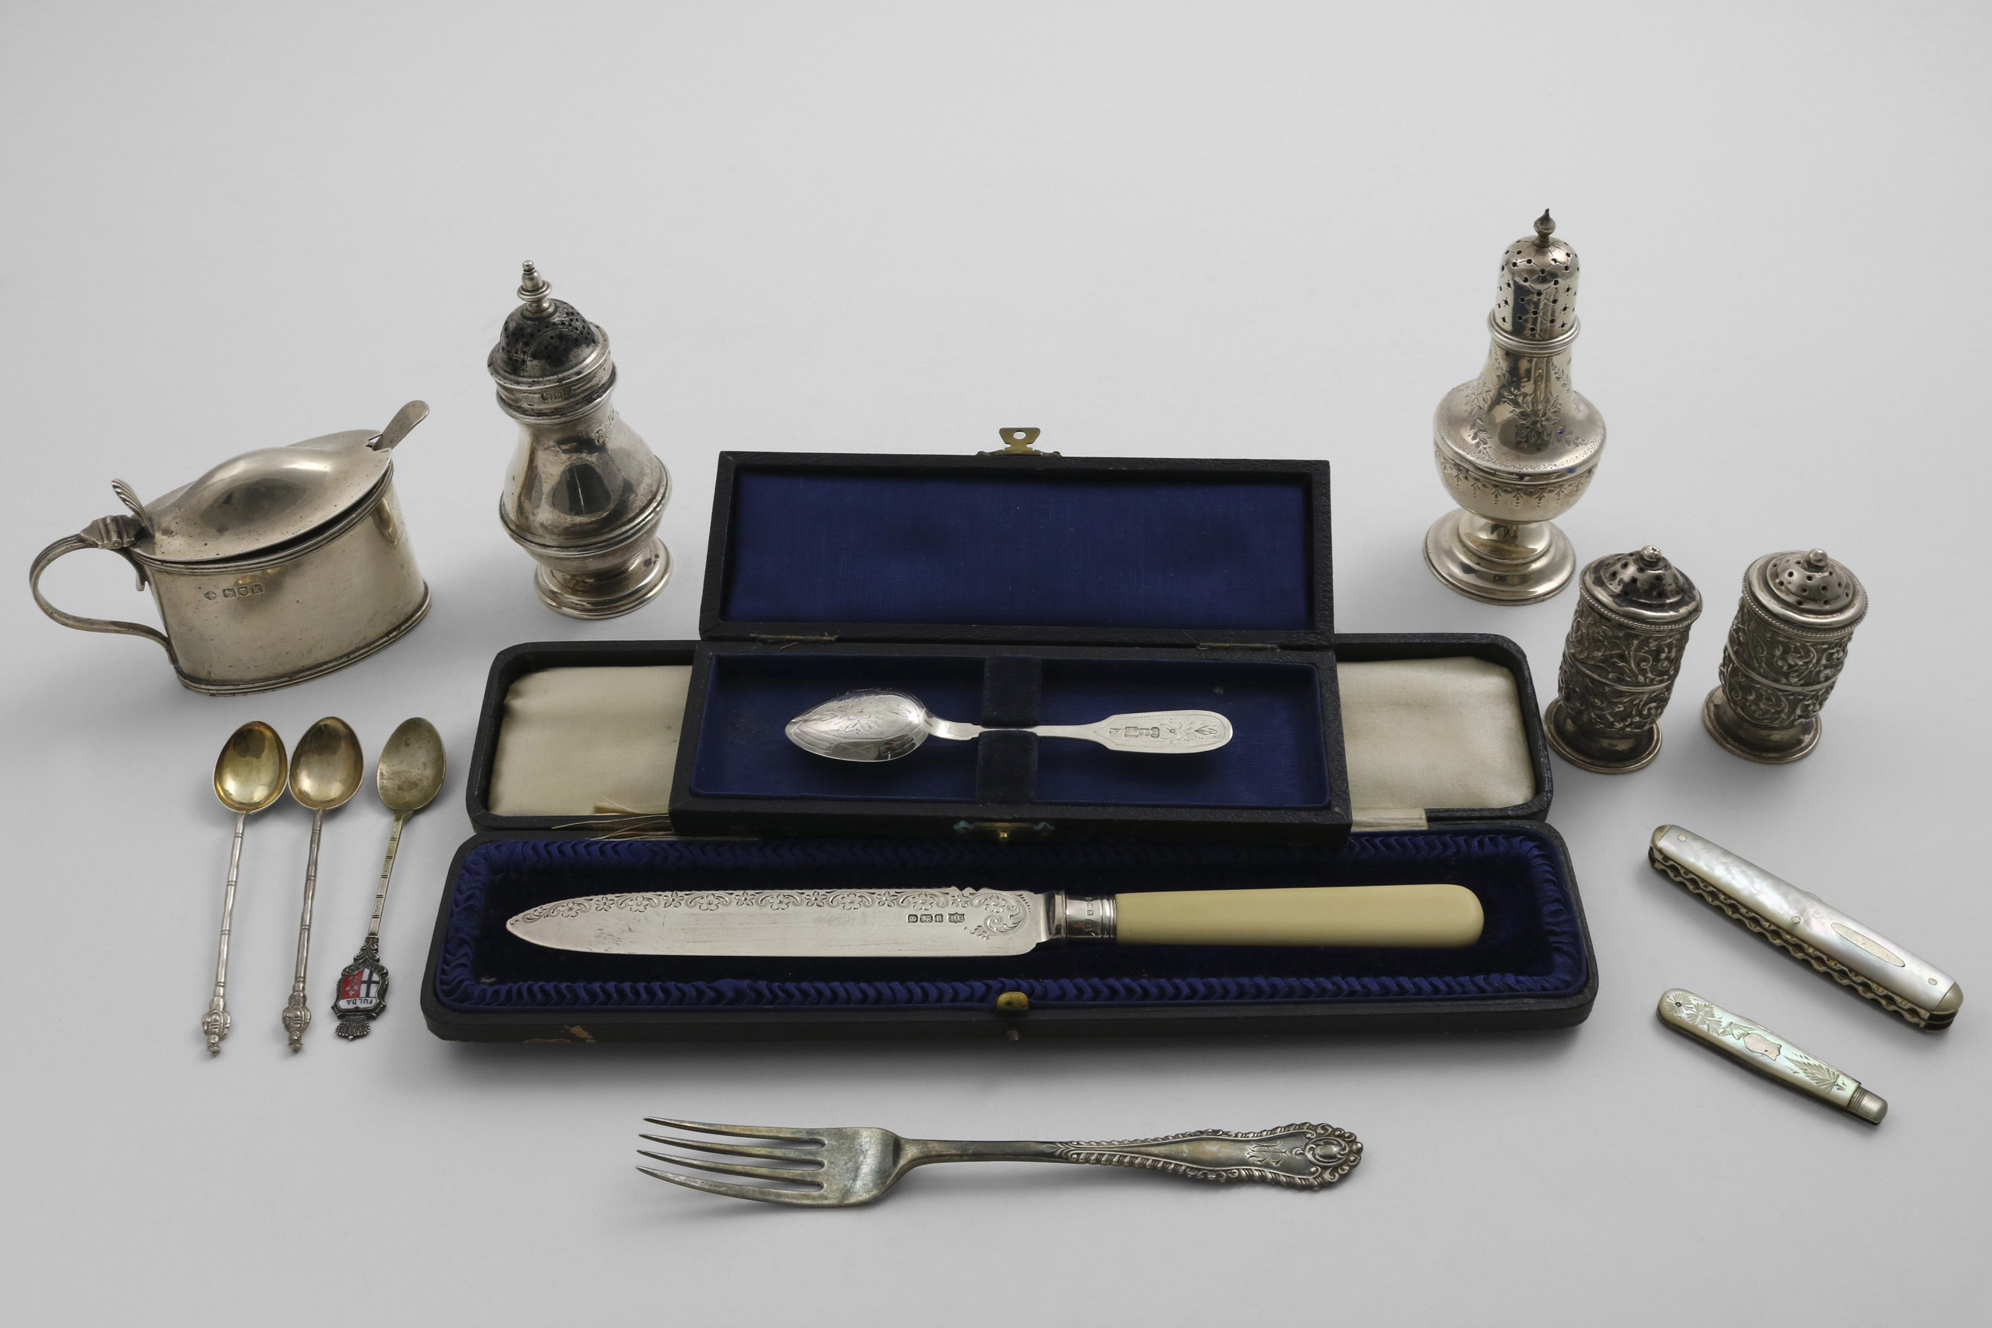 A MIXED LOT:- An ivory-handled cake knife in a fitted case, a Russian engraved tea spoon (in a box),